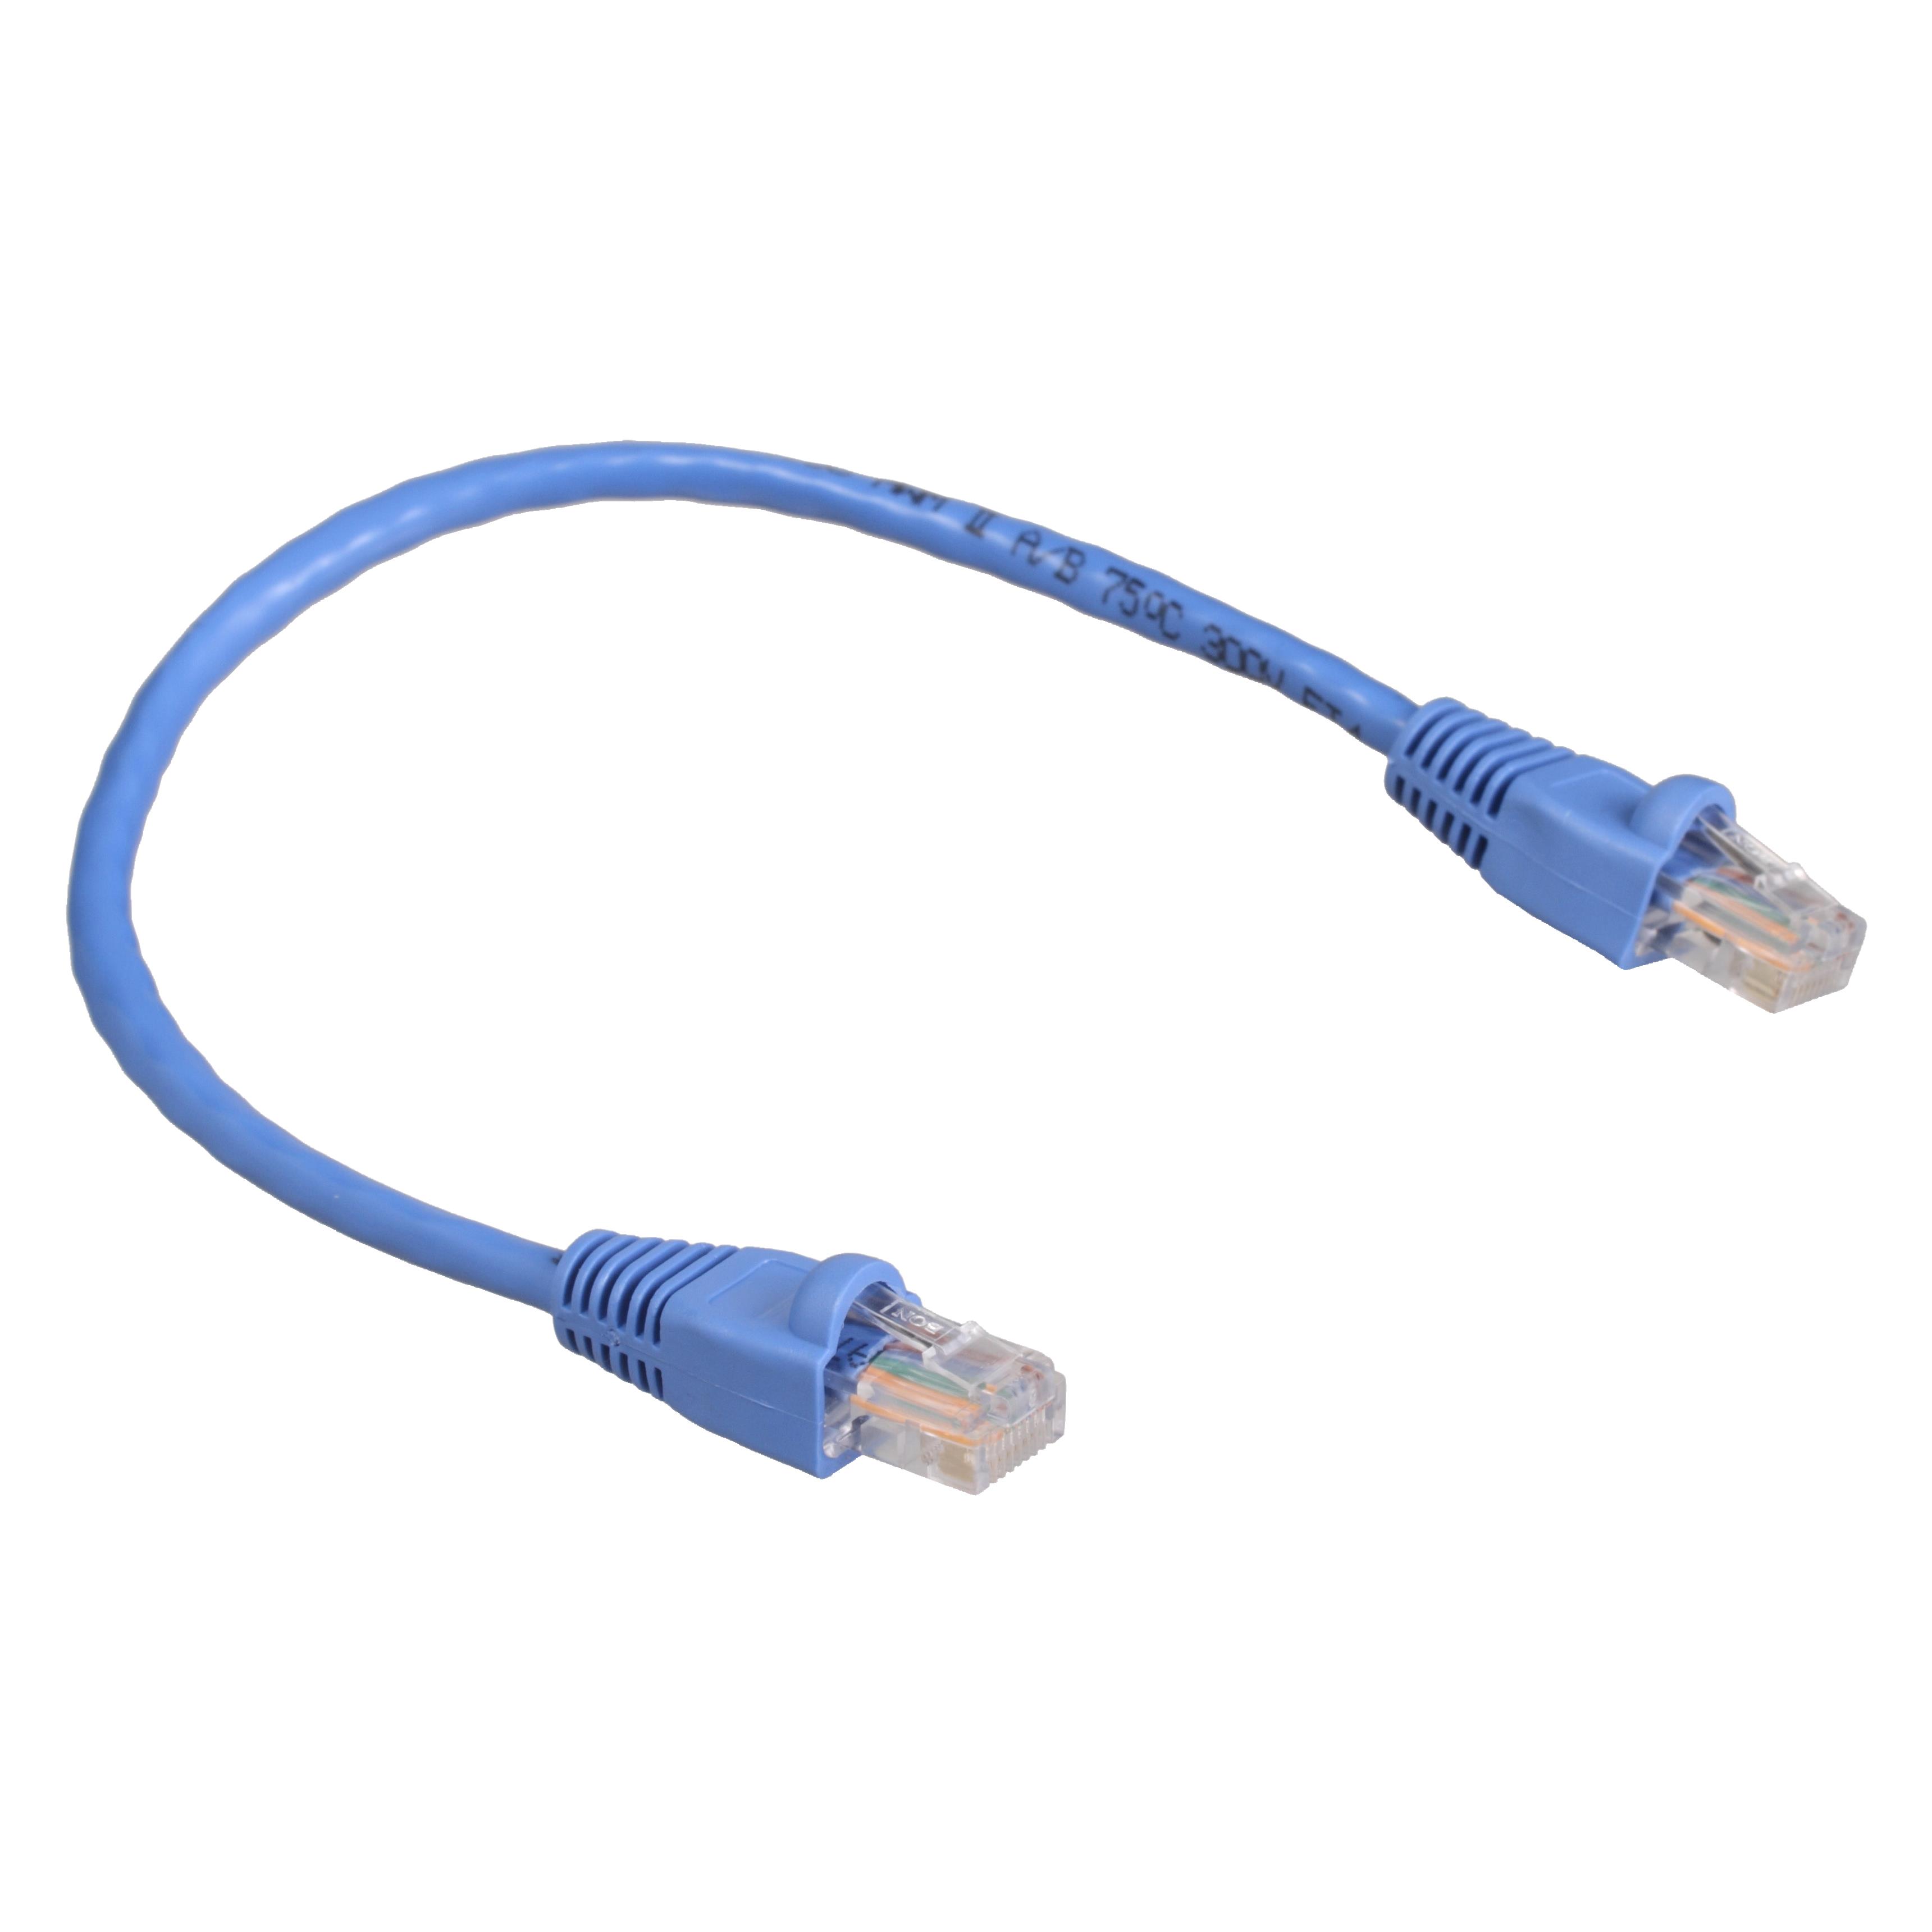 【LU9R03】WIRING 0.3M RJ45 CABLE PARALLEL